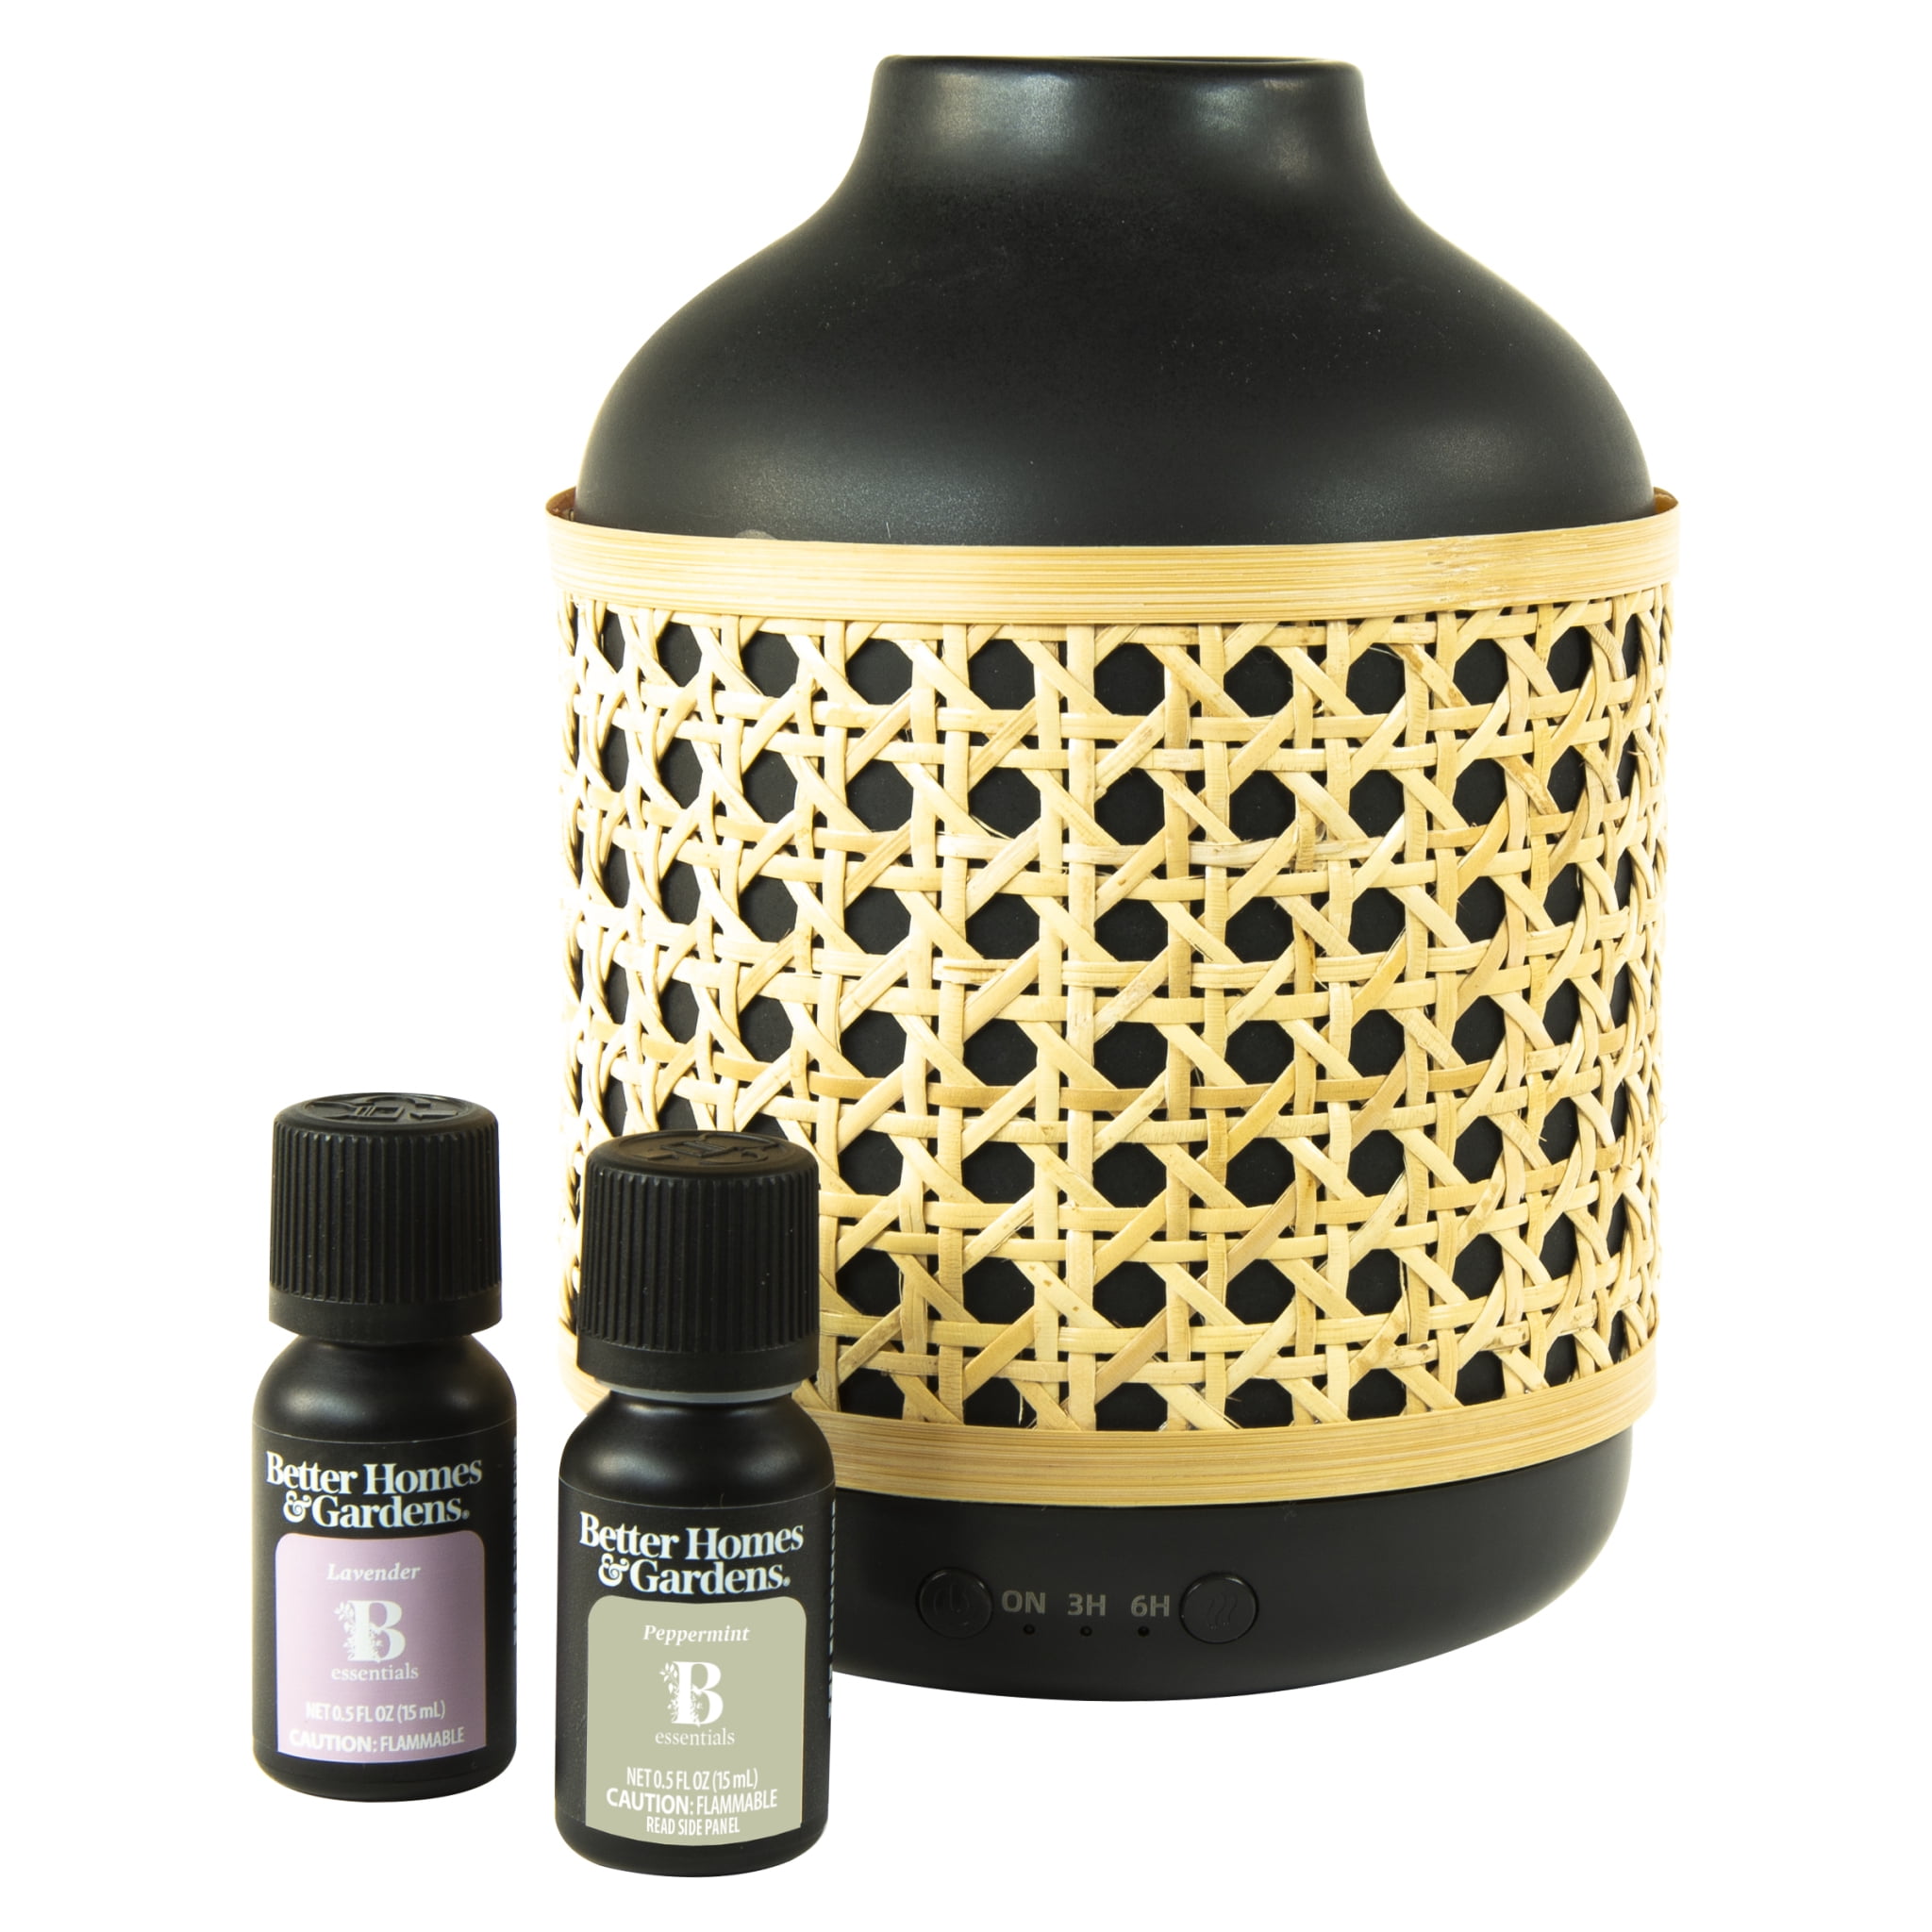 Better Homes & Gardens Cool Mist Ultrasonic Aroma Diffuser 3 Piece Set, Black Caning, 250 ml